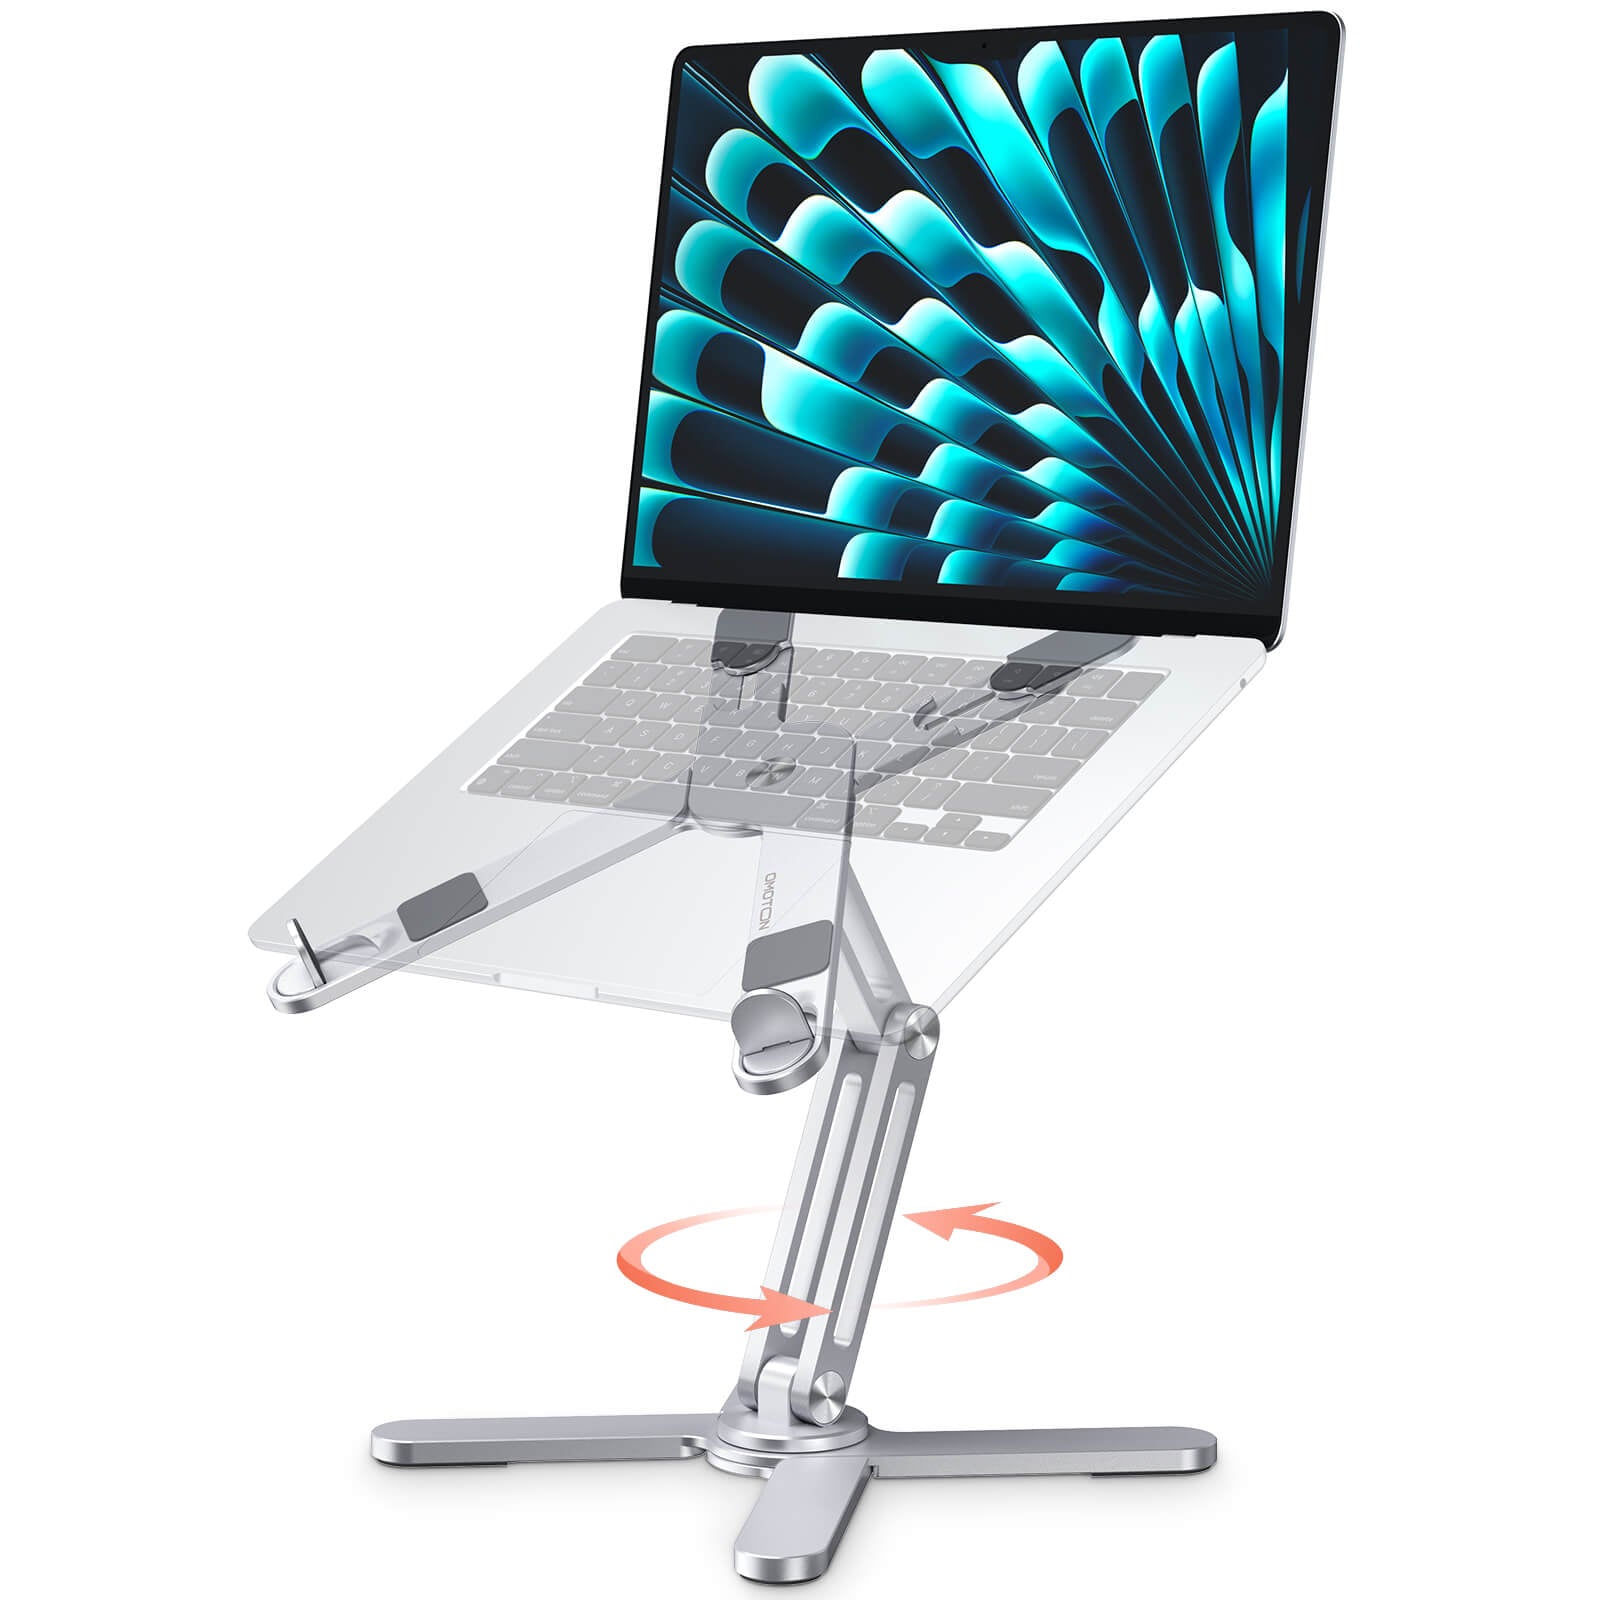 360° Rotation Laptop Stand